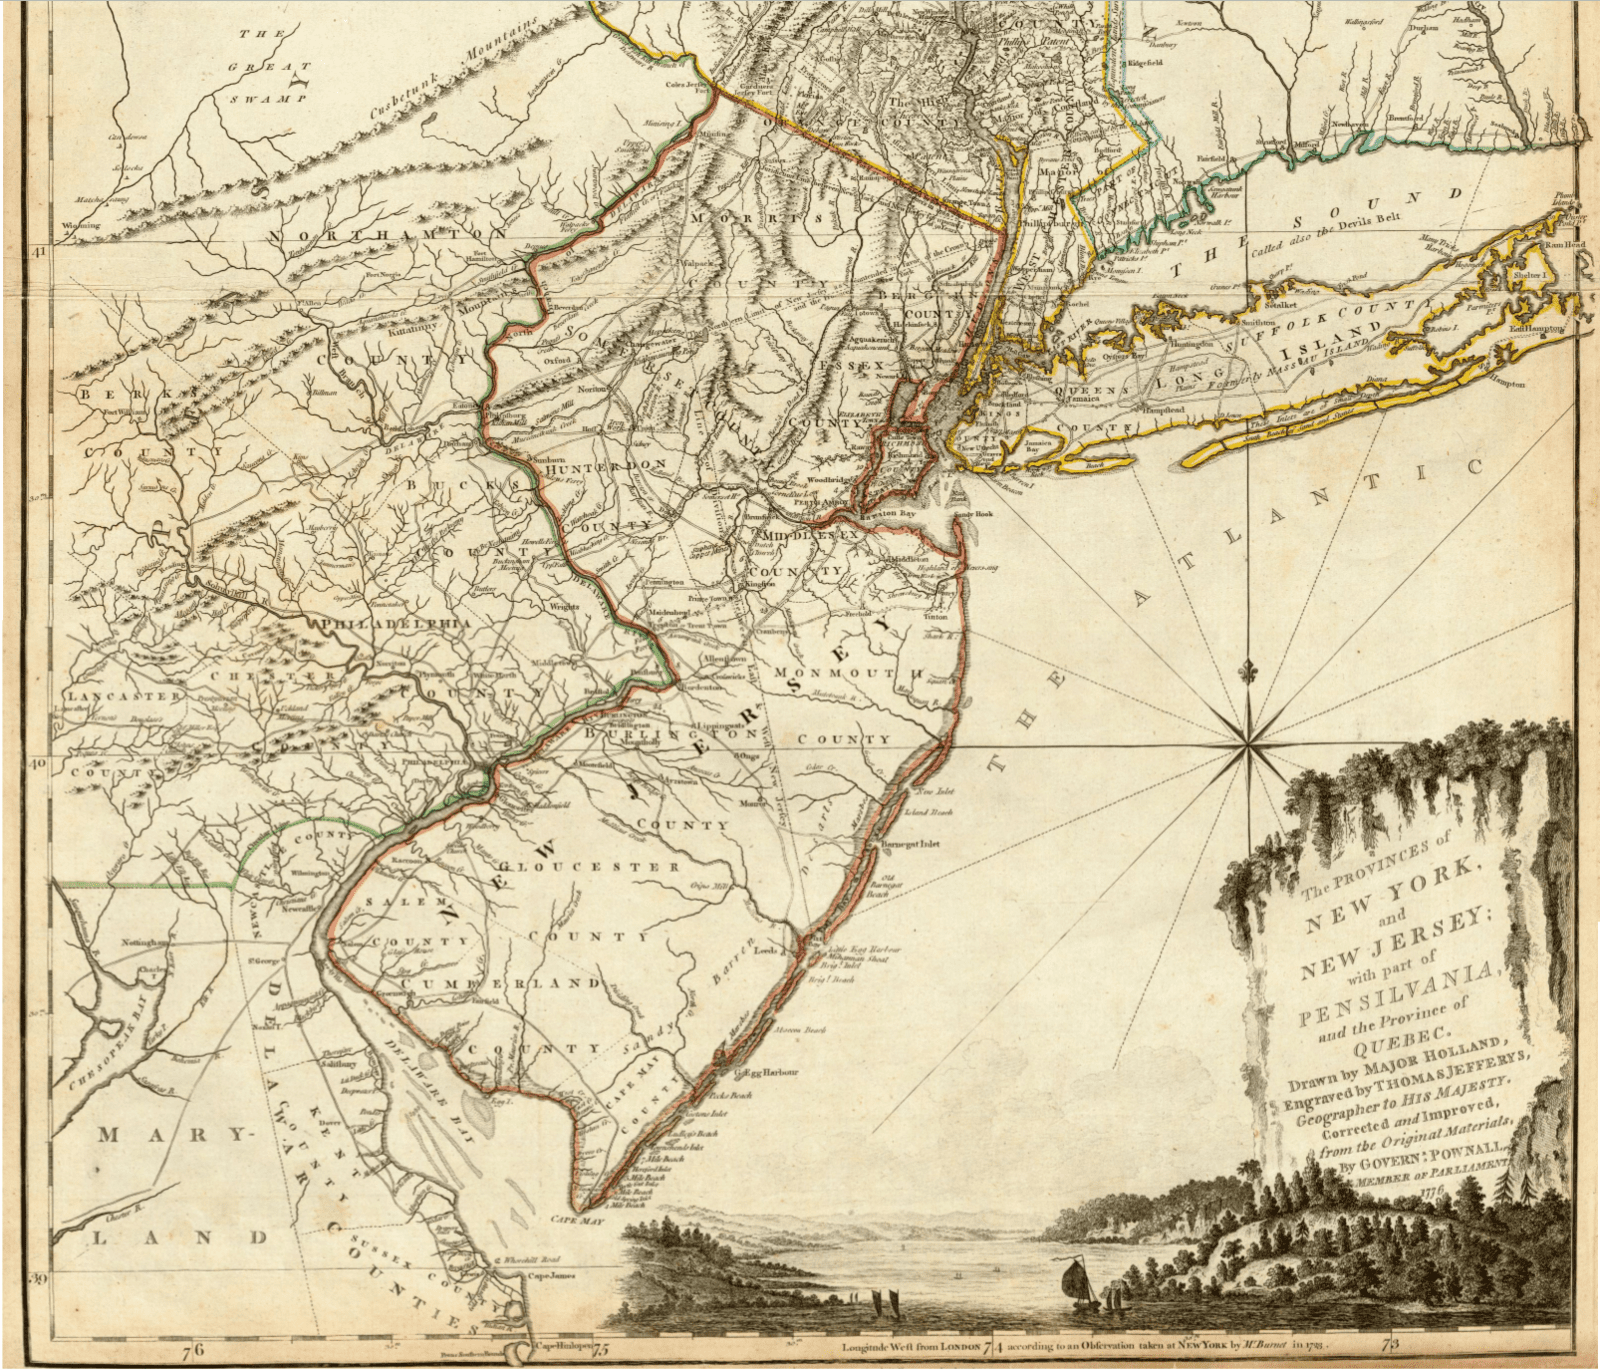 1776: Map of the Provinces of New Jersey, New York, and Pennsylvania